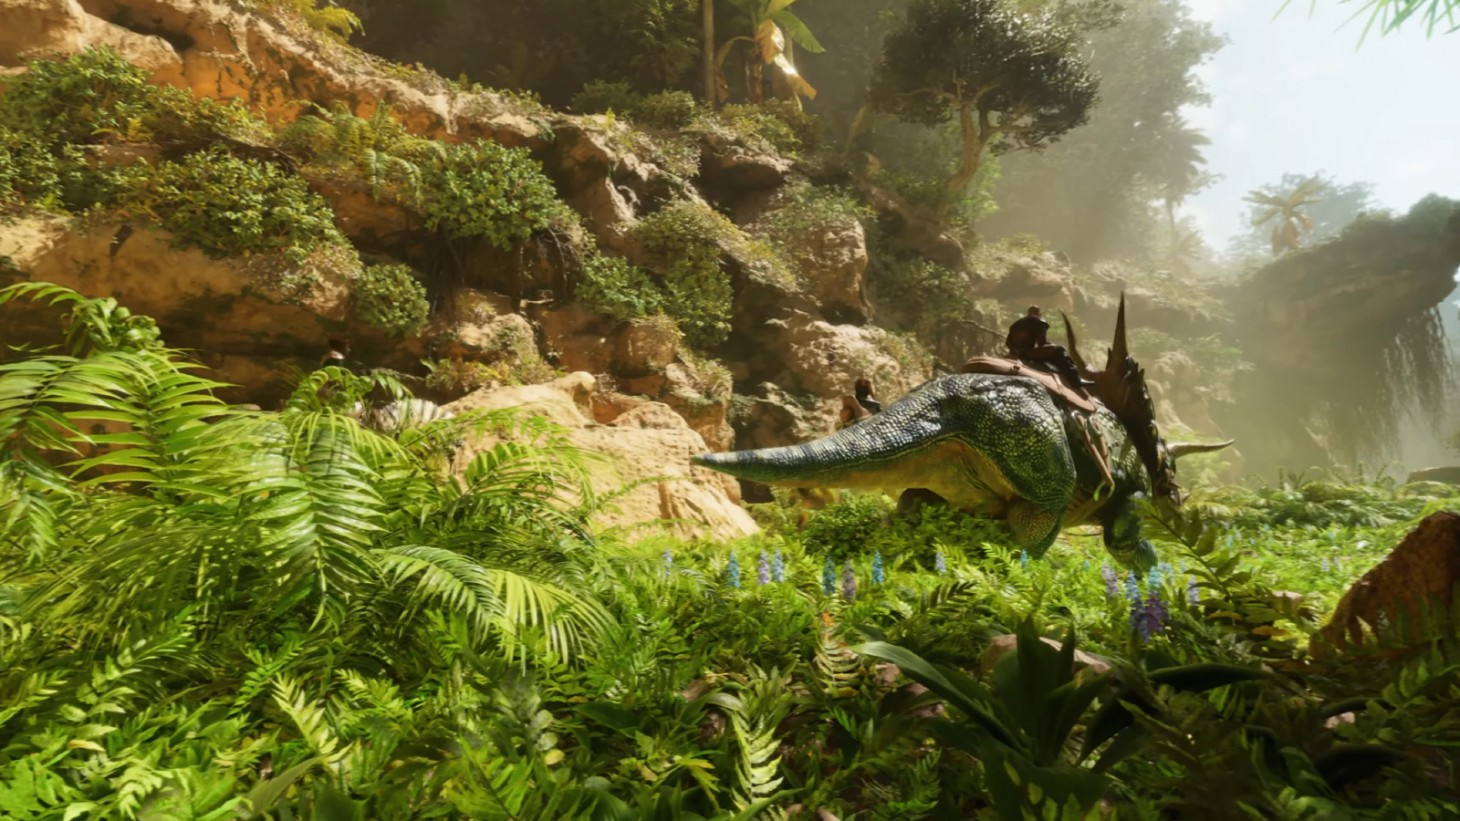 Ark: Survival Ascended (2023), Xbox Series X, S Game